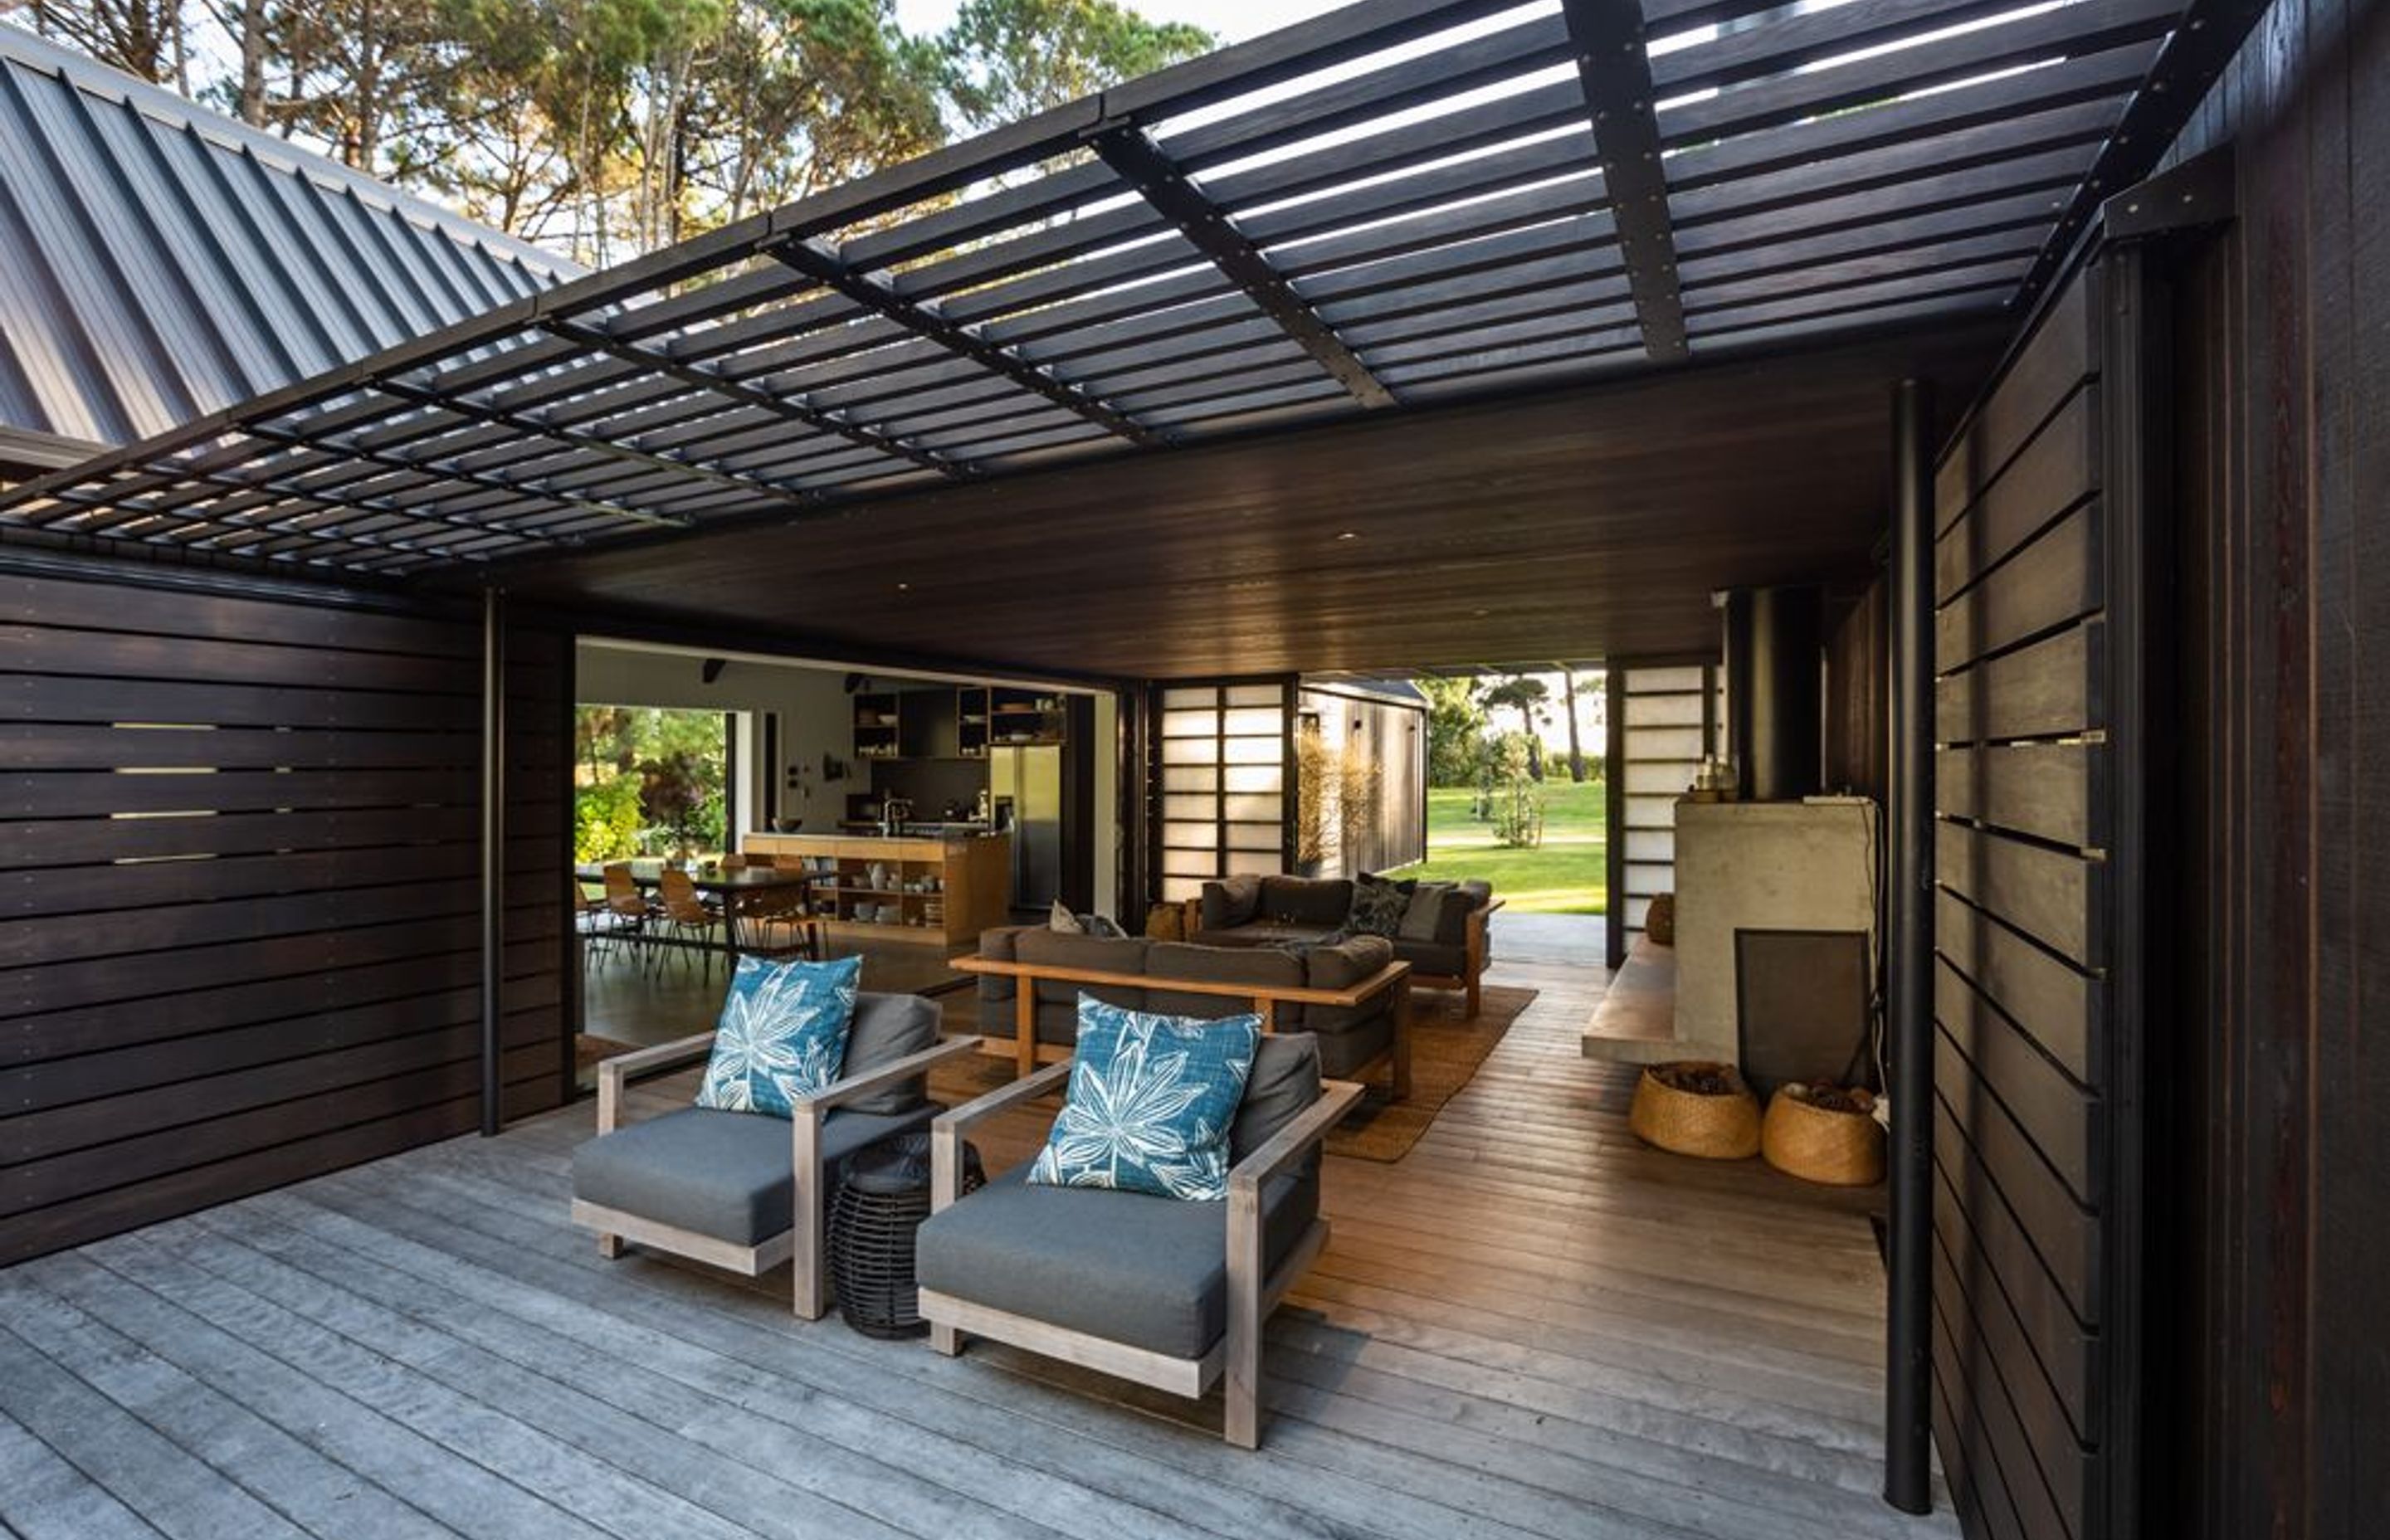 The central sheltered living area extends to a generous open-air deck. 